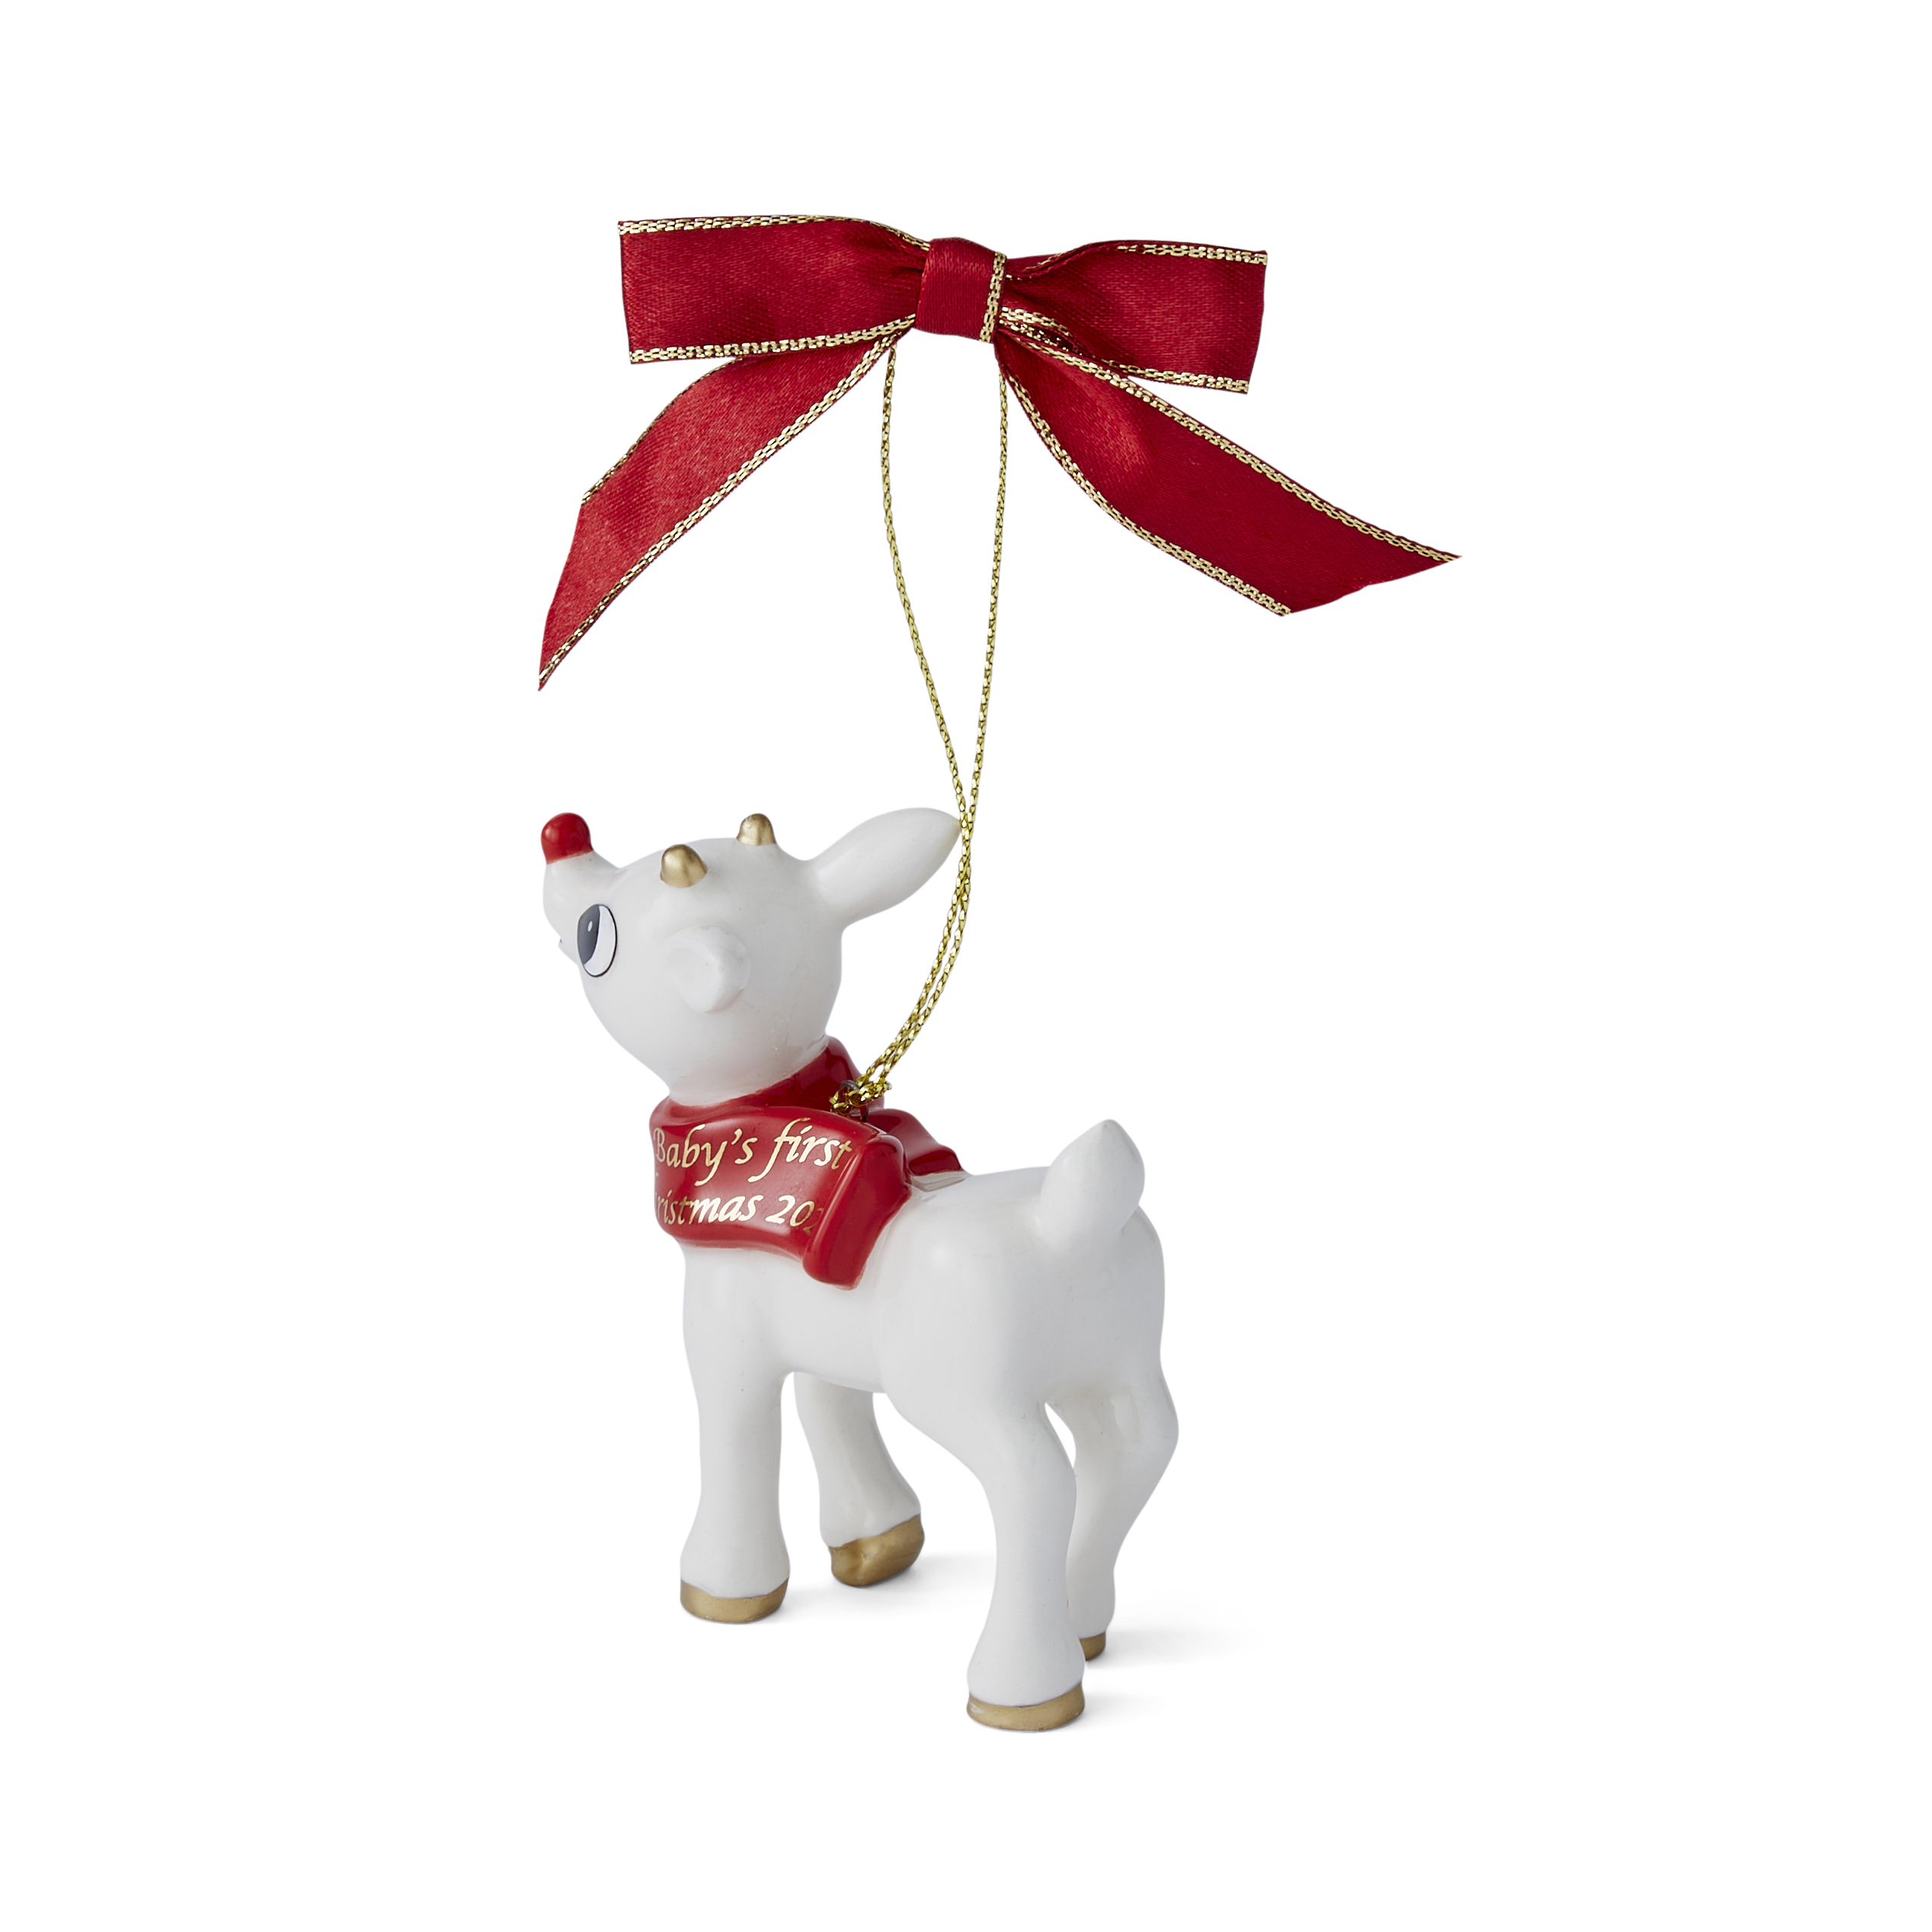 Rudolph The Red Nosed Reindeer® Baby's First Christmas Ornament 2023 image number null